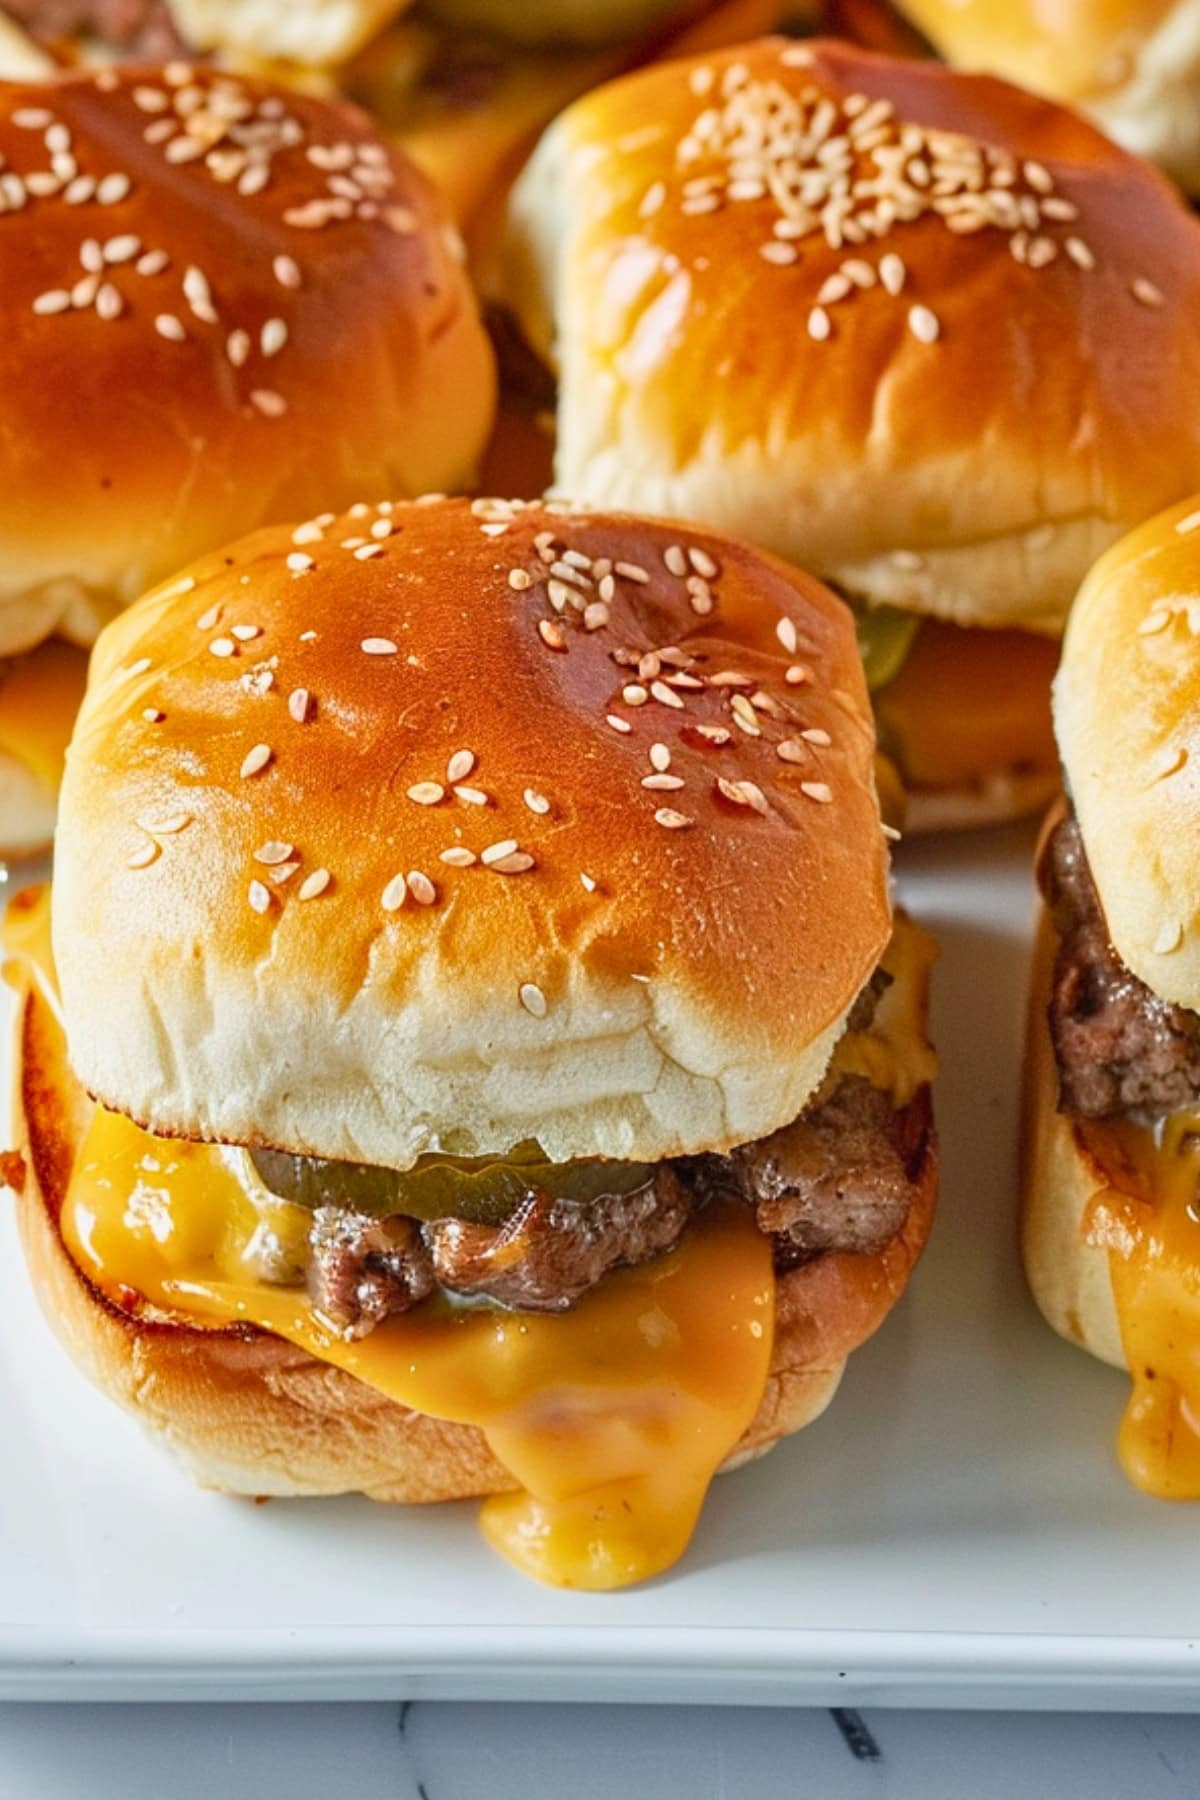 Cheeseburger sliders with melted cheese, beef patty and sliced pickles.